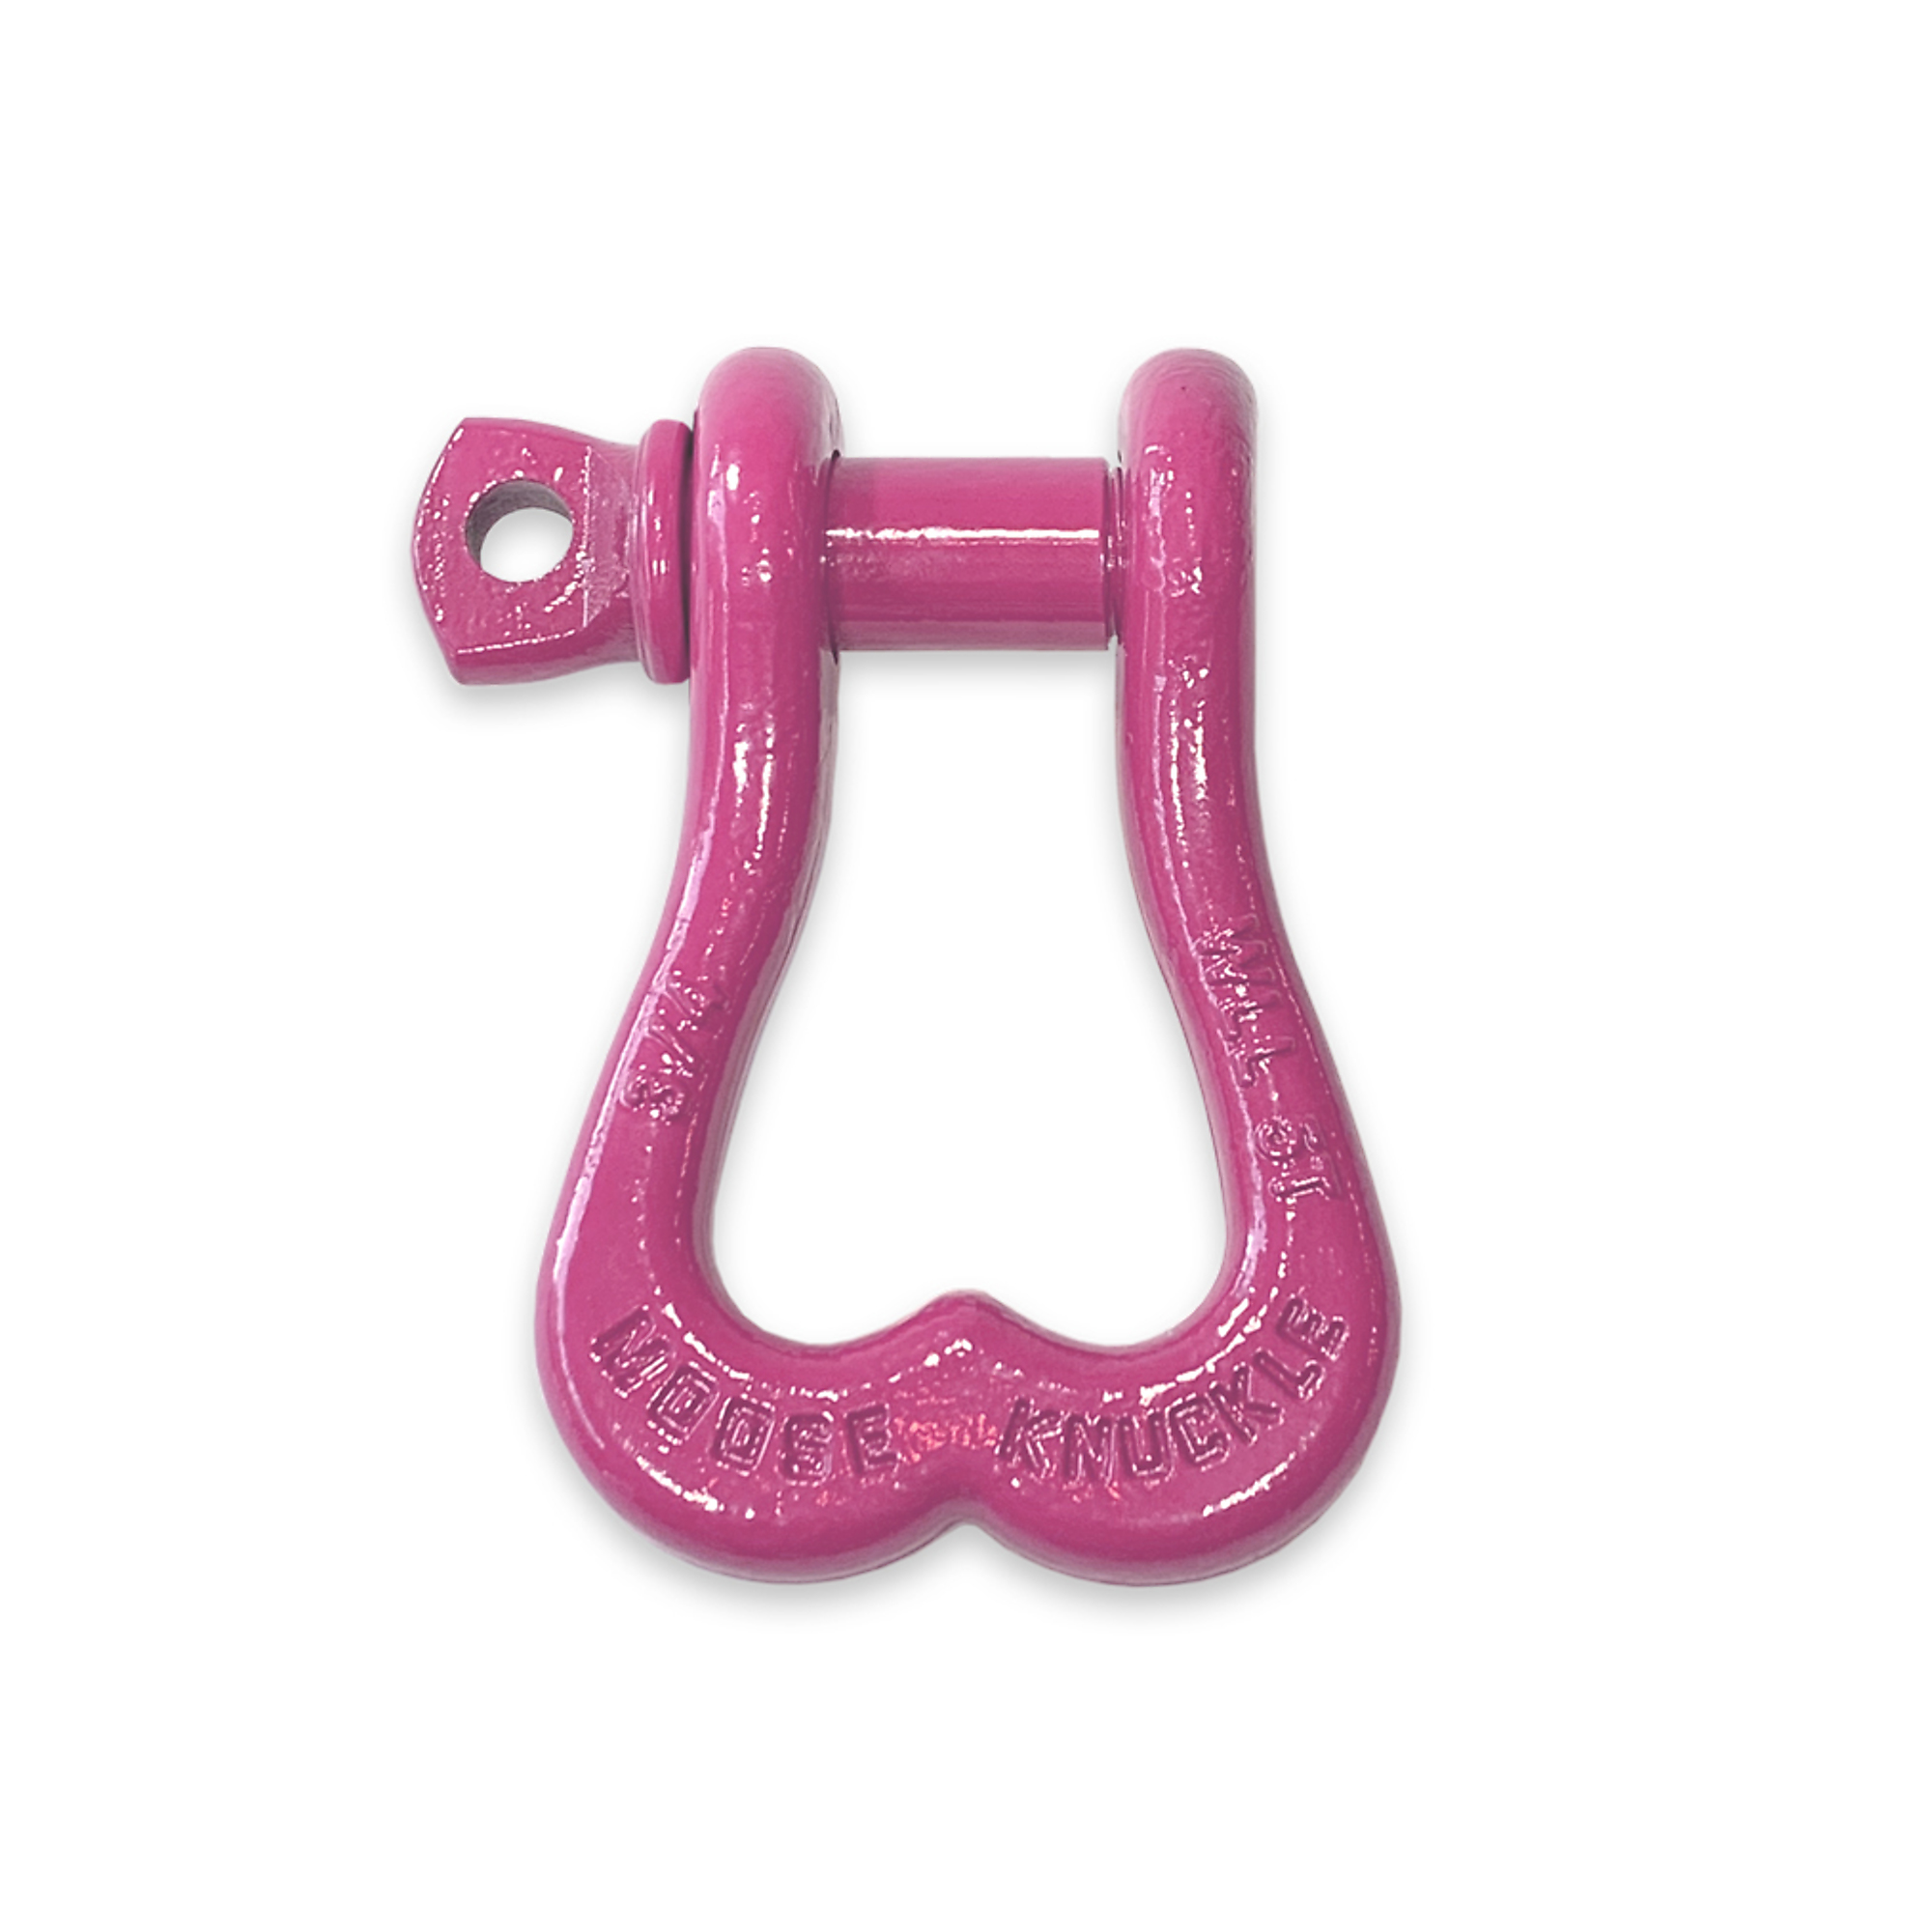 Moose Knuckle Offroad, Pretty Pink 3/4Inch Recovery Towing Shackle, Working Load Limit 10000 lb, Model FN000001-007